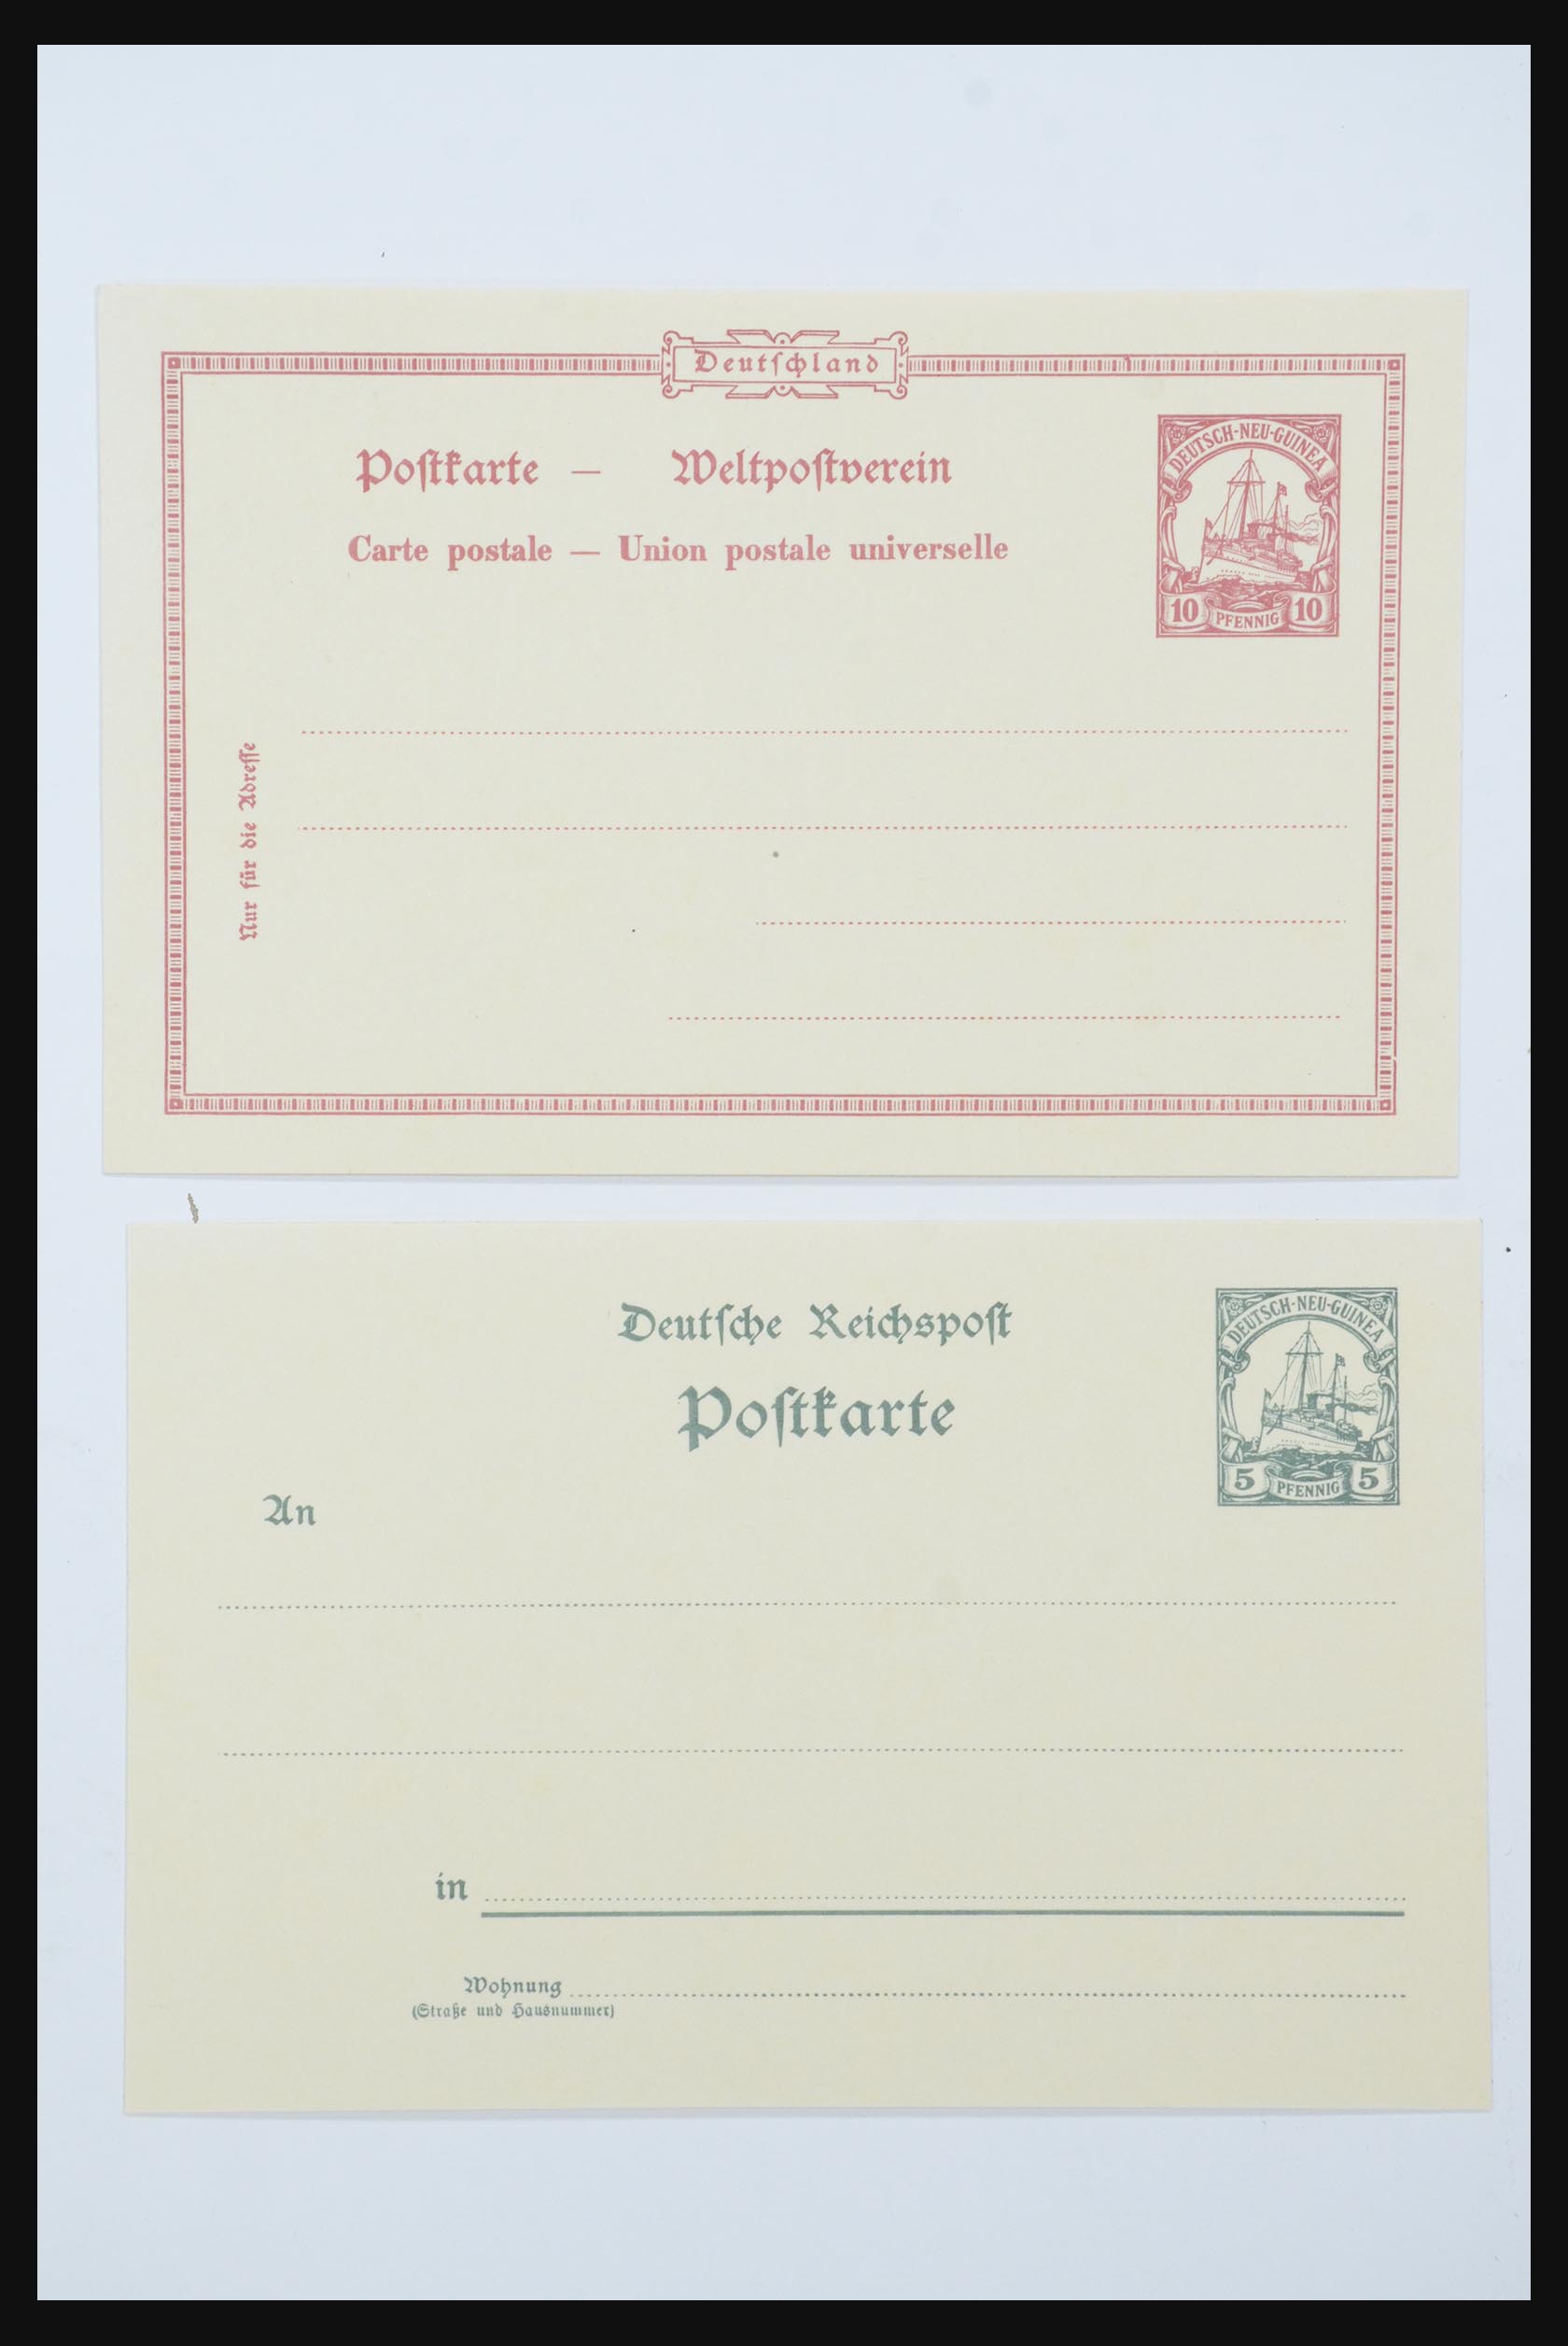 31608 601 - 31608 Germany, territories, States, occupations 1850-1965.